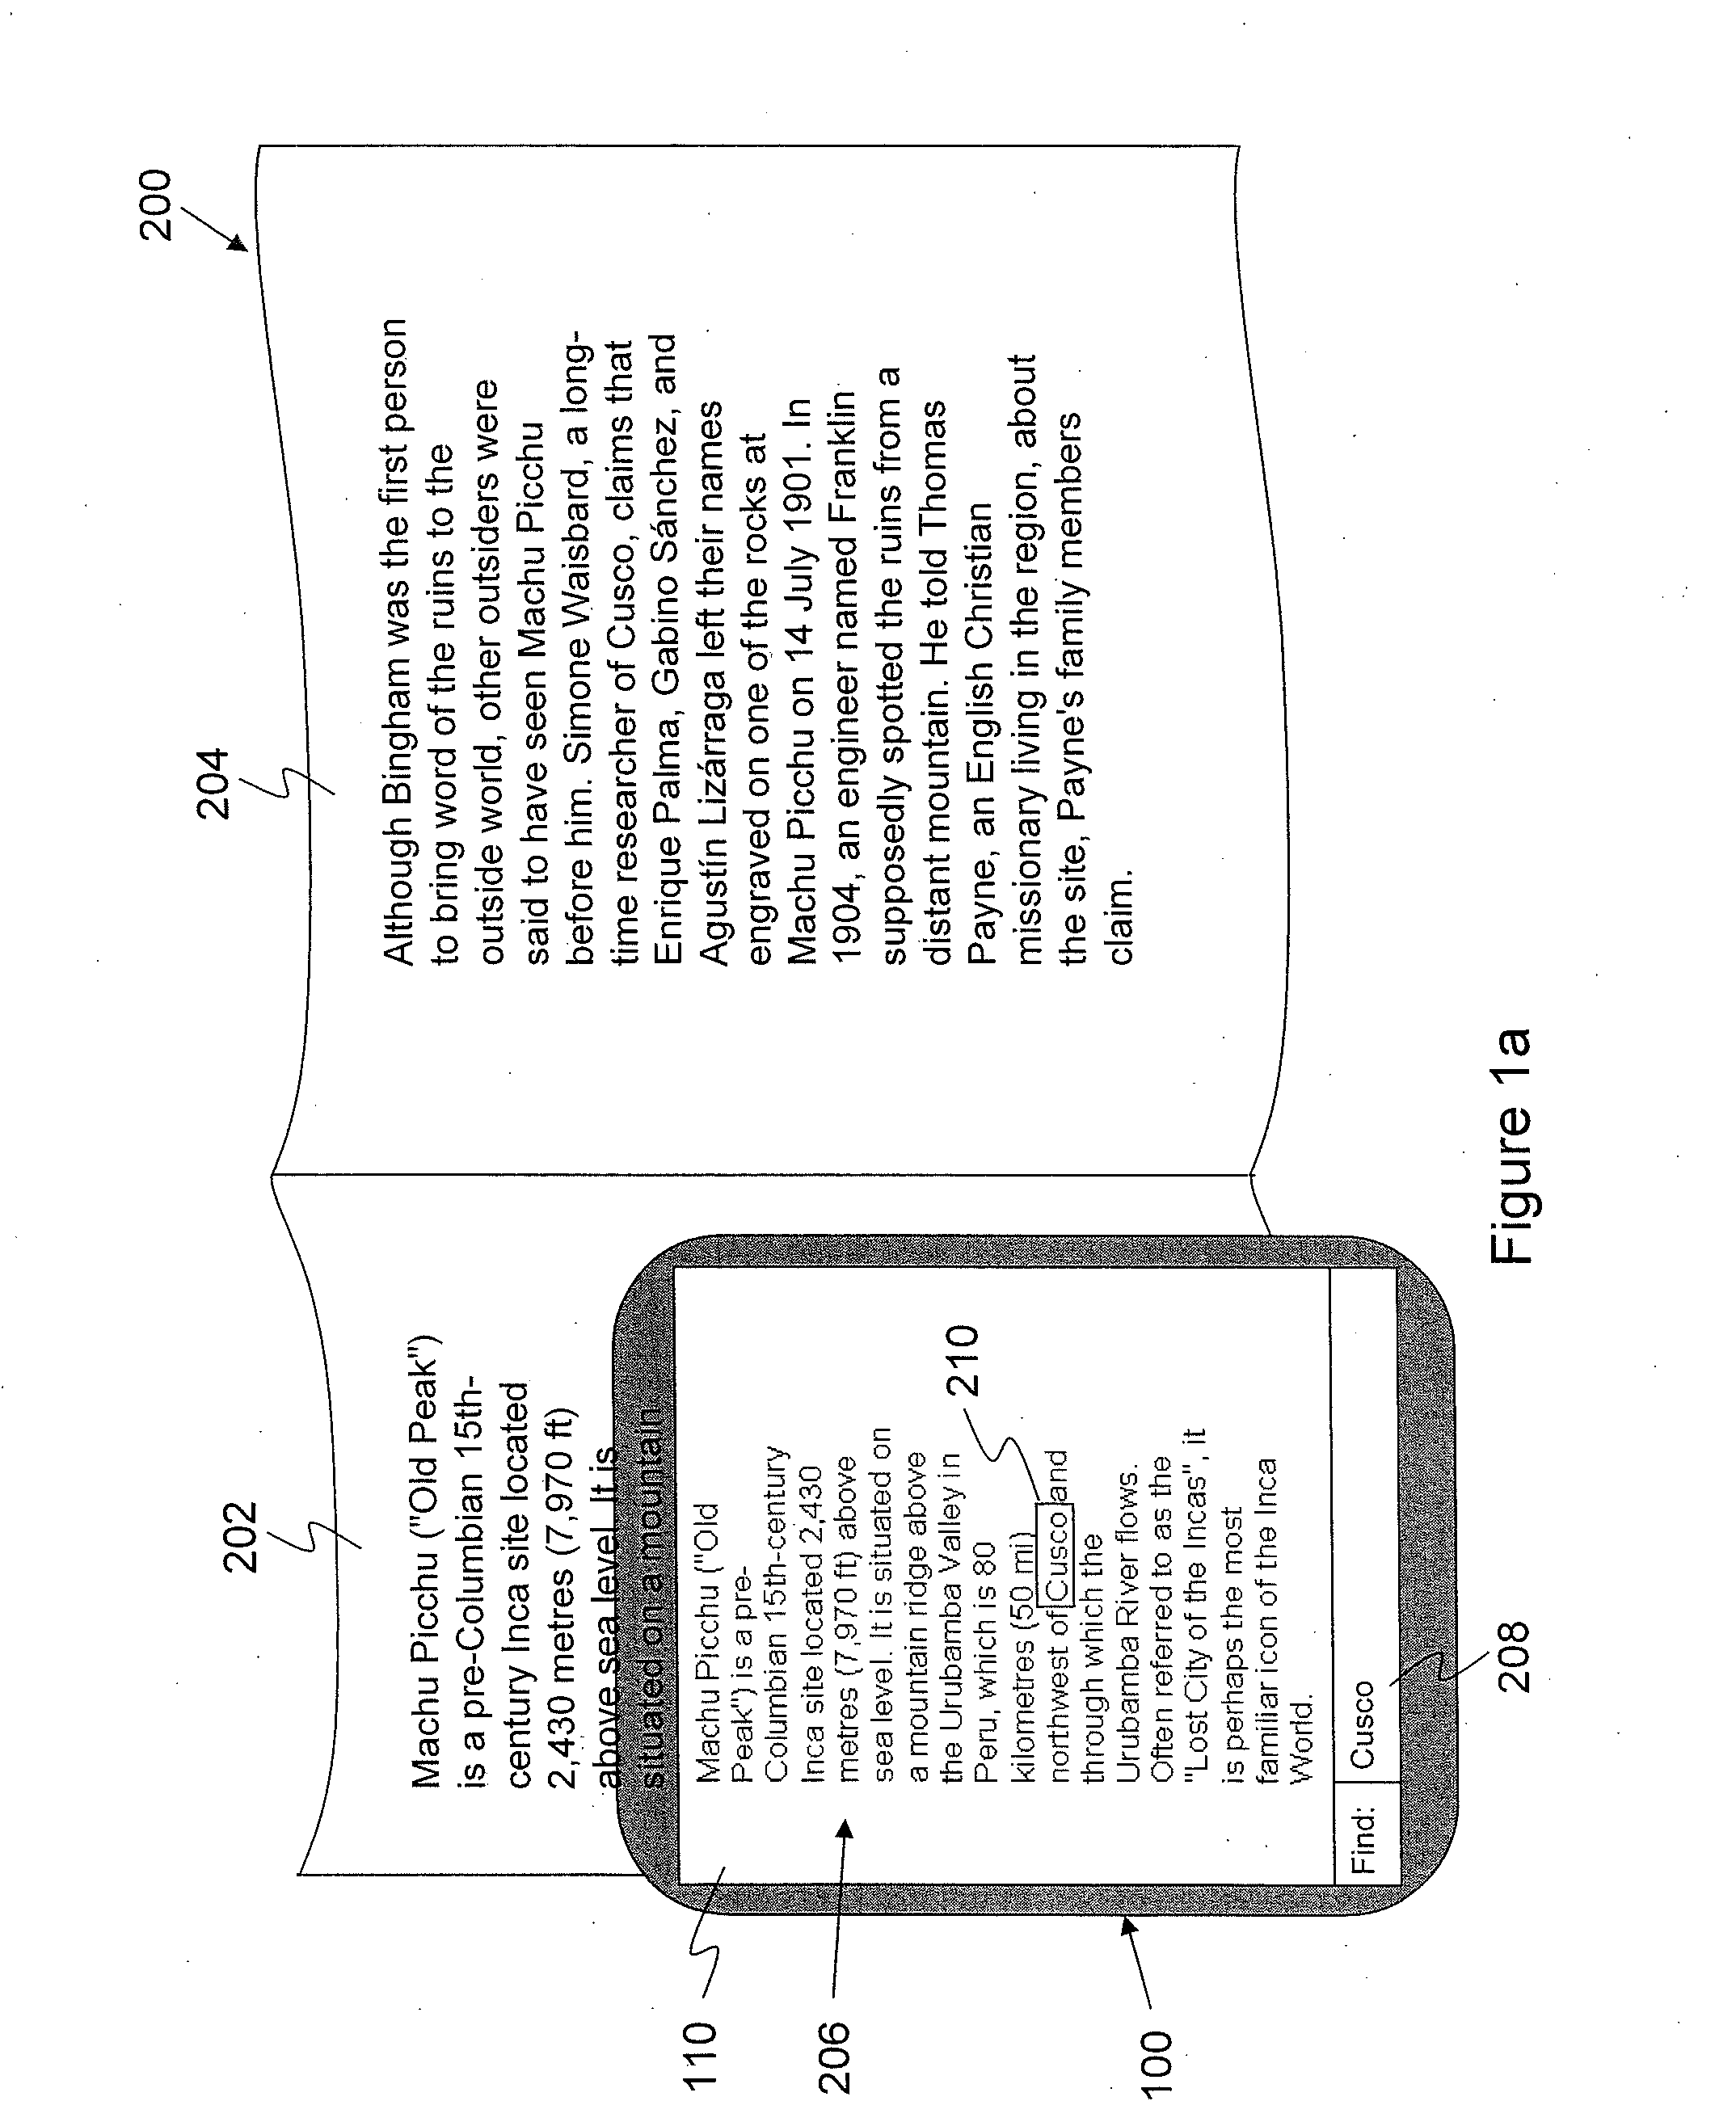 System and Method for Searching for Text and Displaying Found Text in Augmented Reality